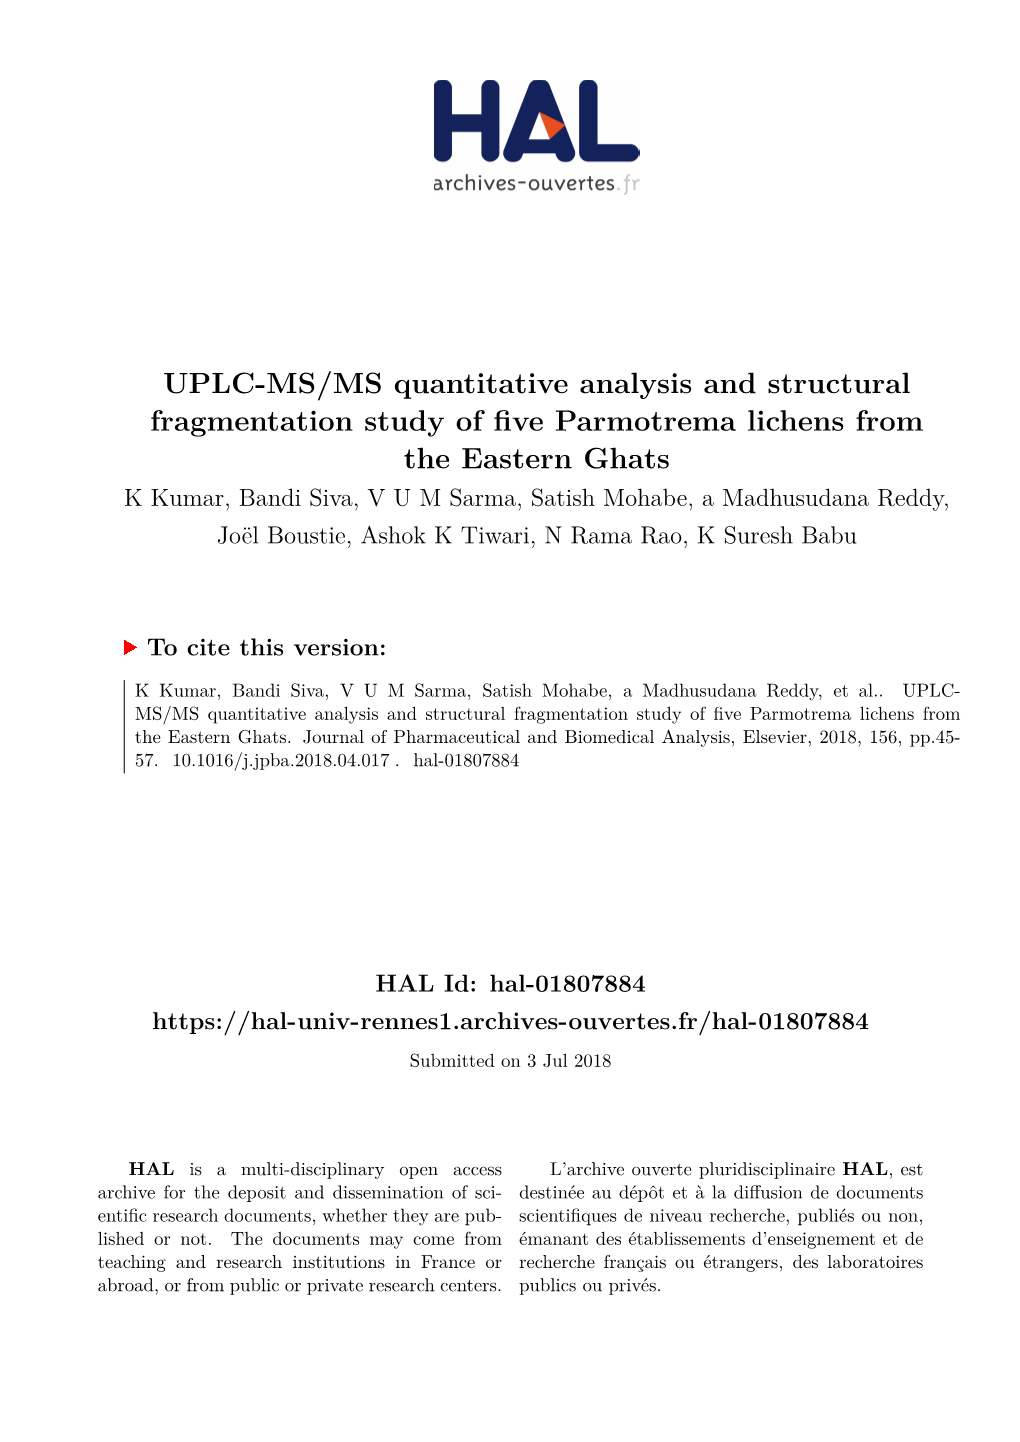 UPLC-MS/MS Quantitative Analysis and Structural Fragmentation Study